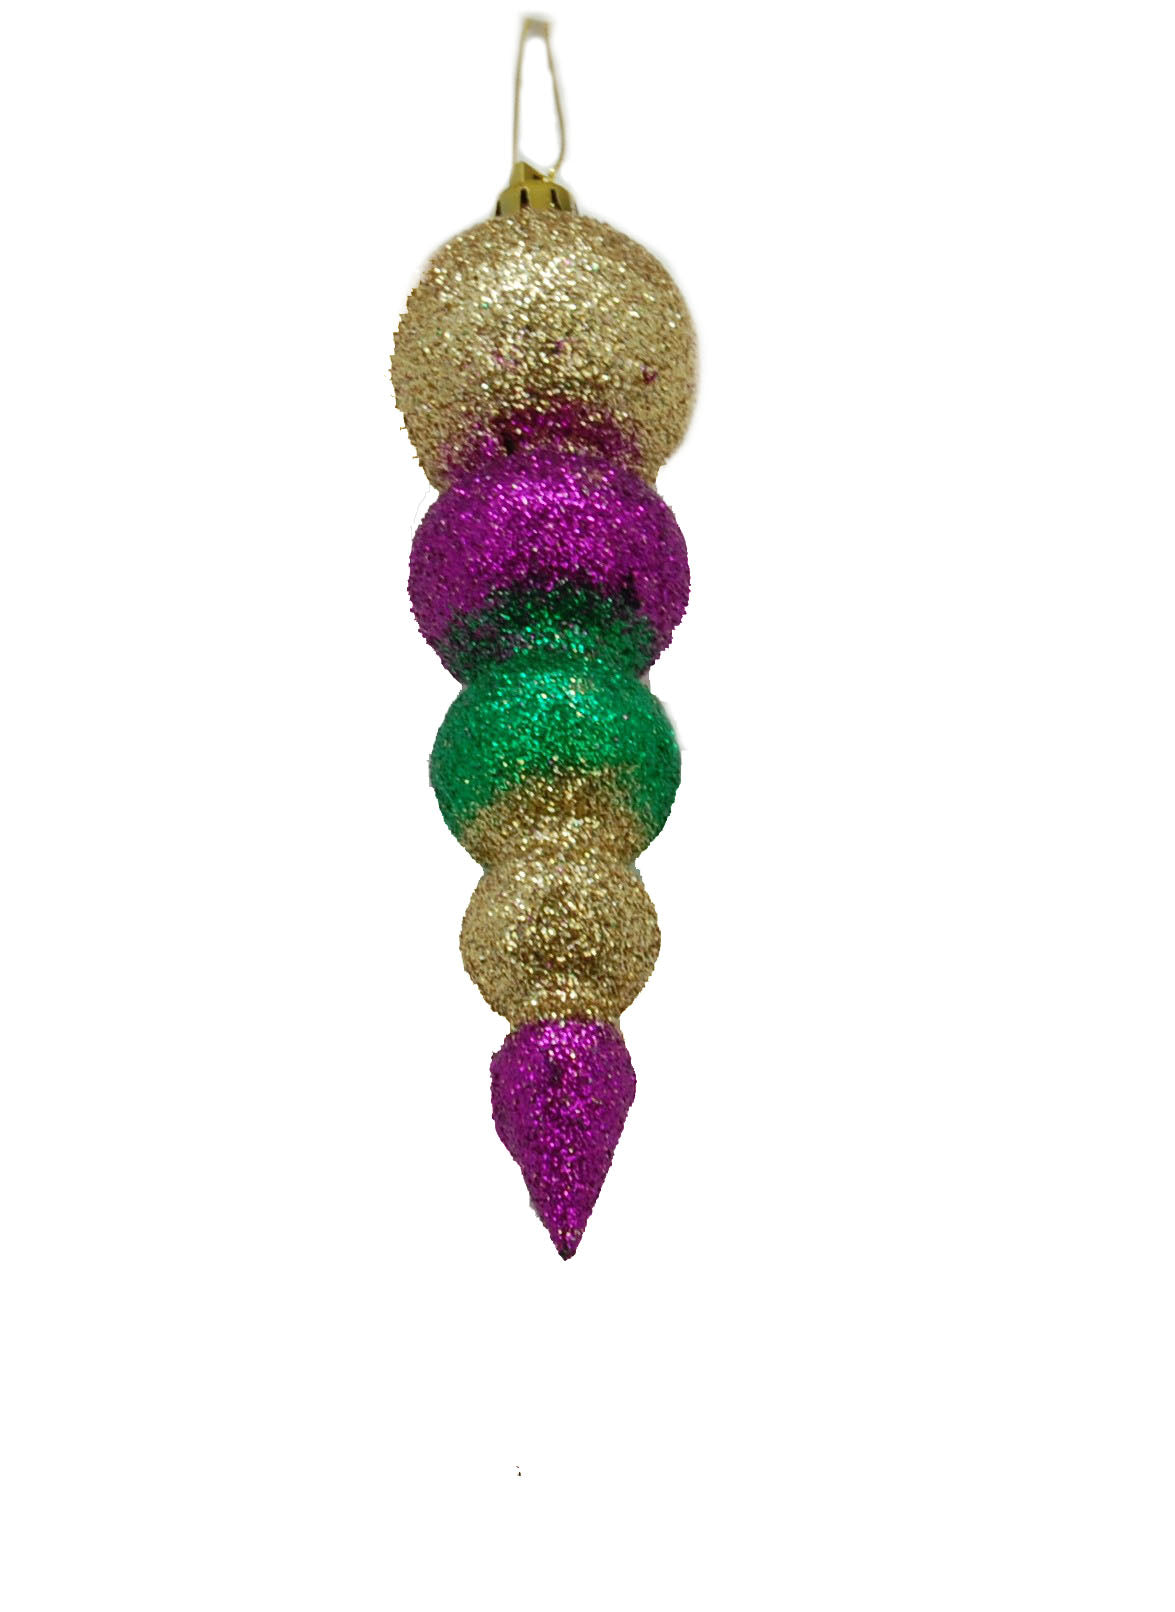 6" Purple, Green and Gold Ball Tower Ornament